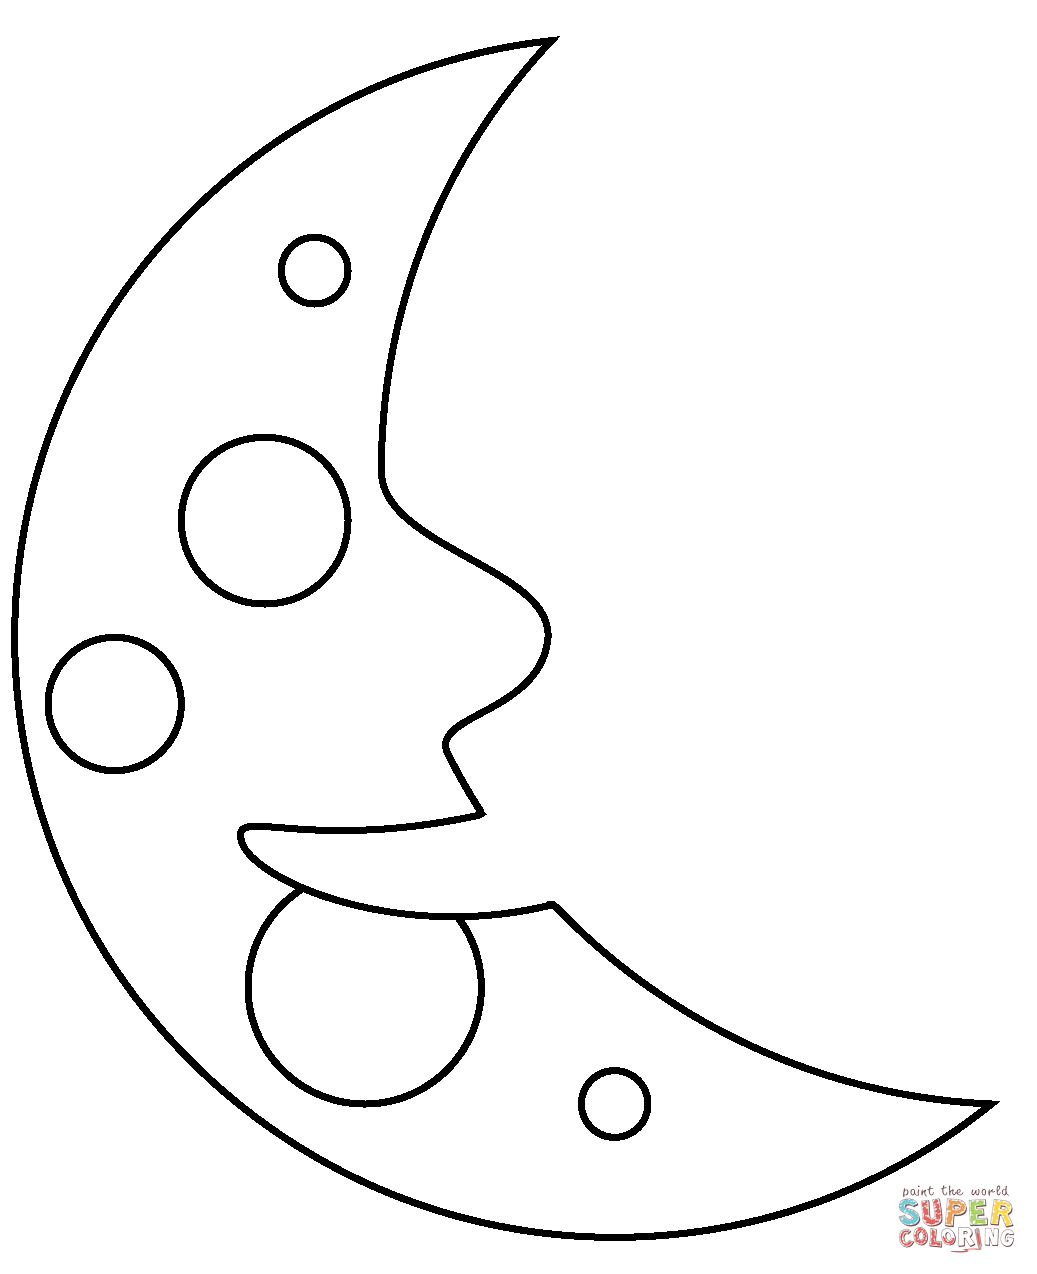 Last quarter moon face emoji coloring page free printable coloring pages